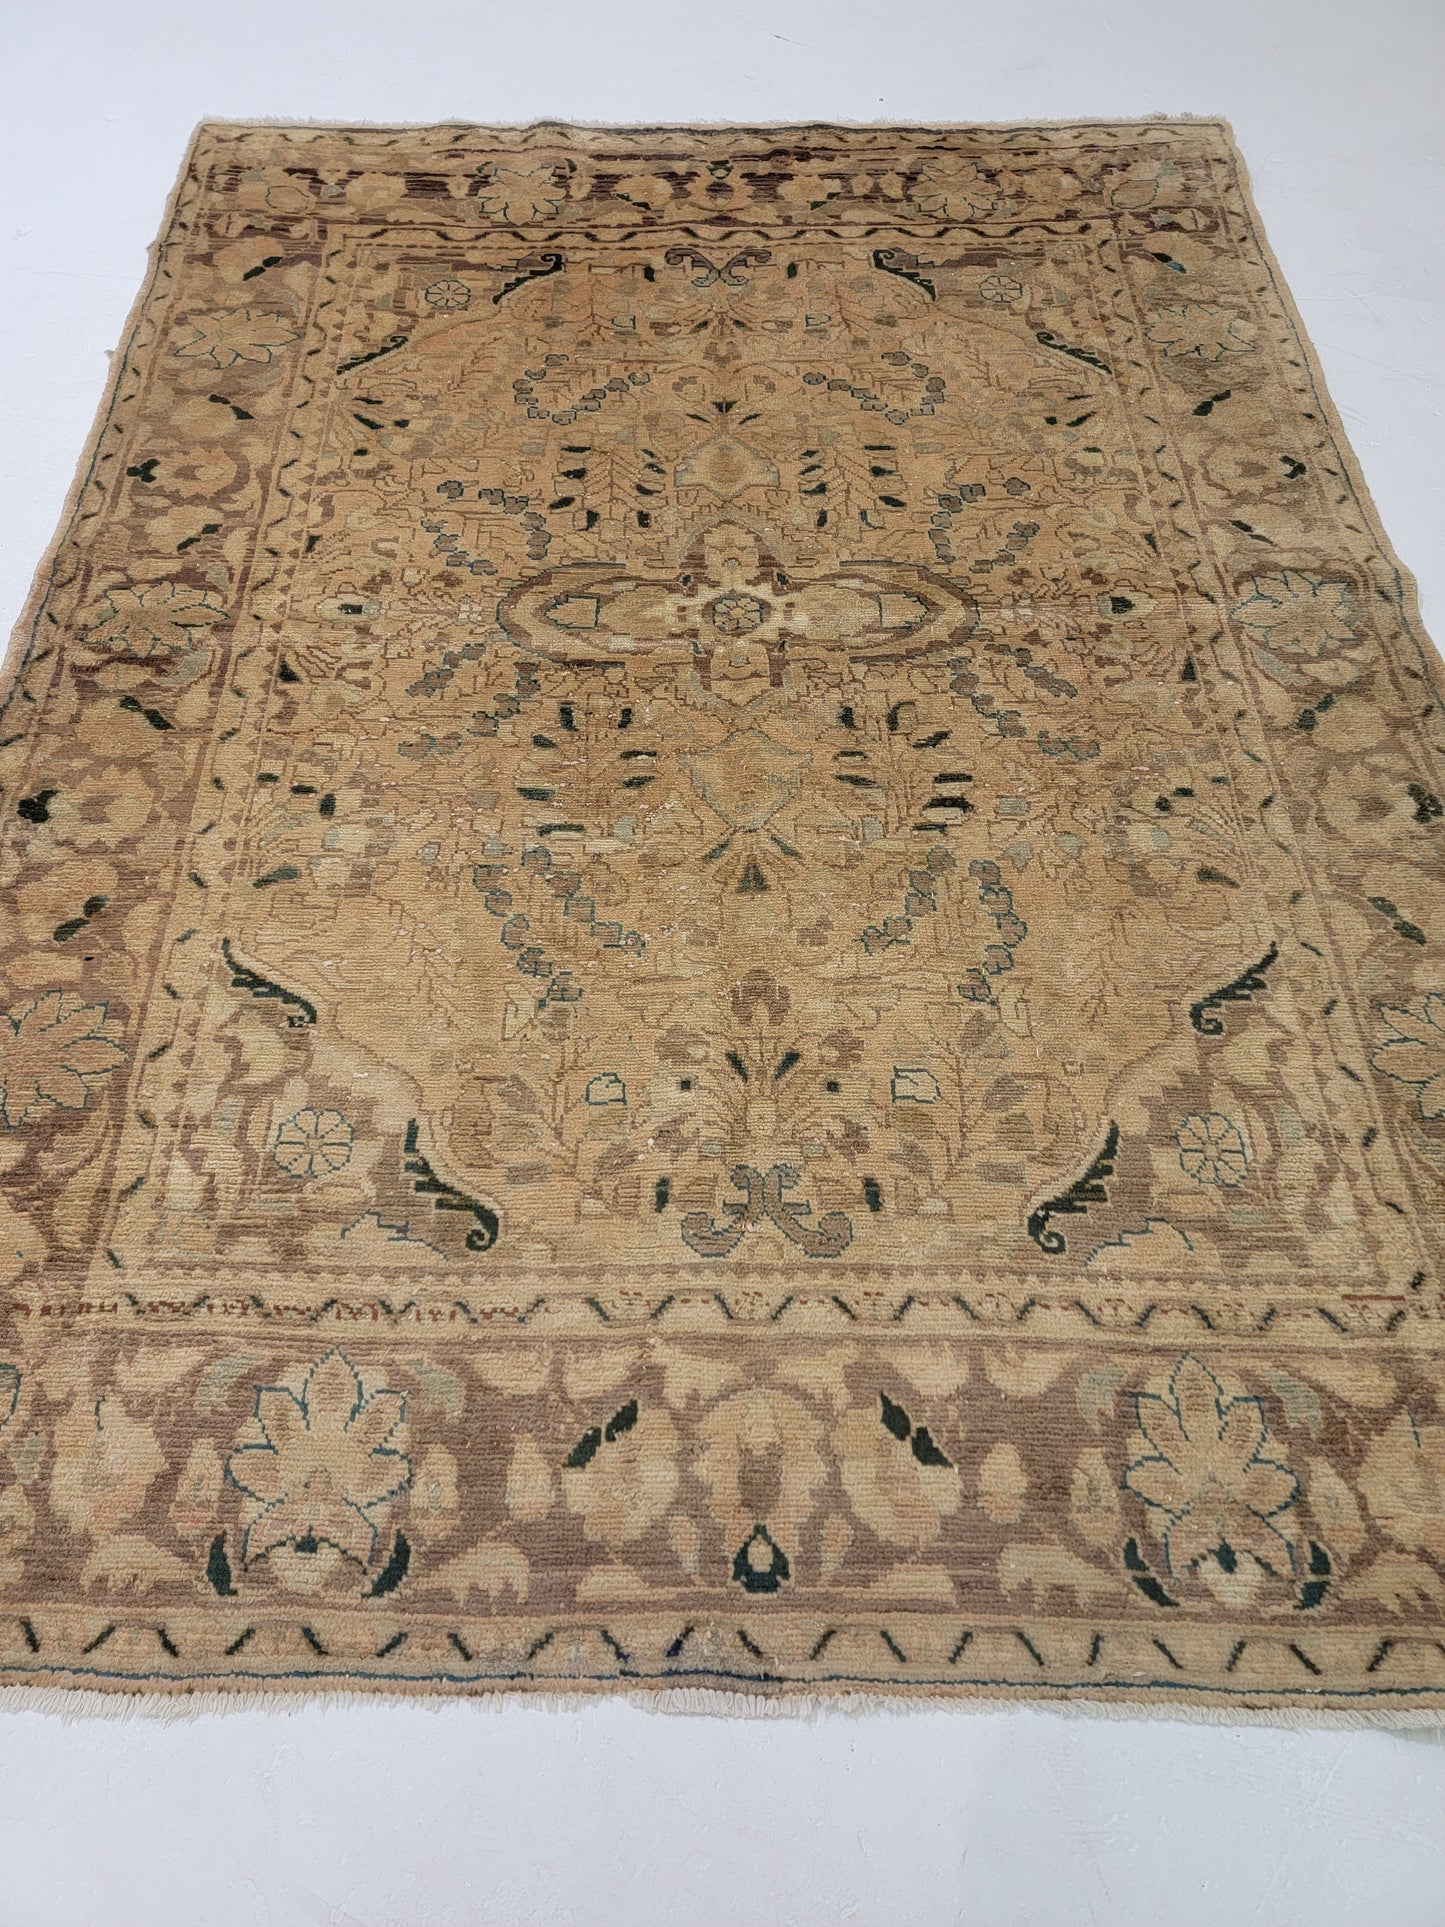 Antique Hand-Knotted Wool Area Rug Armenian Lillian 5' x 7'